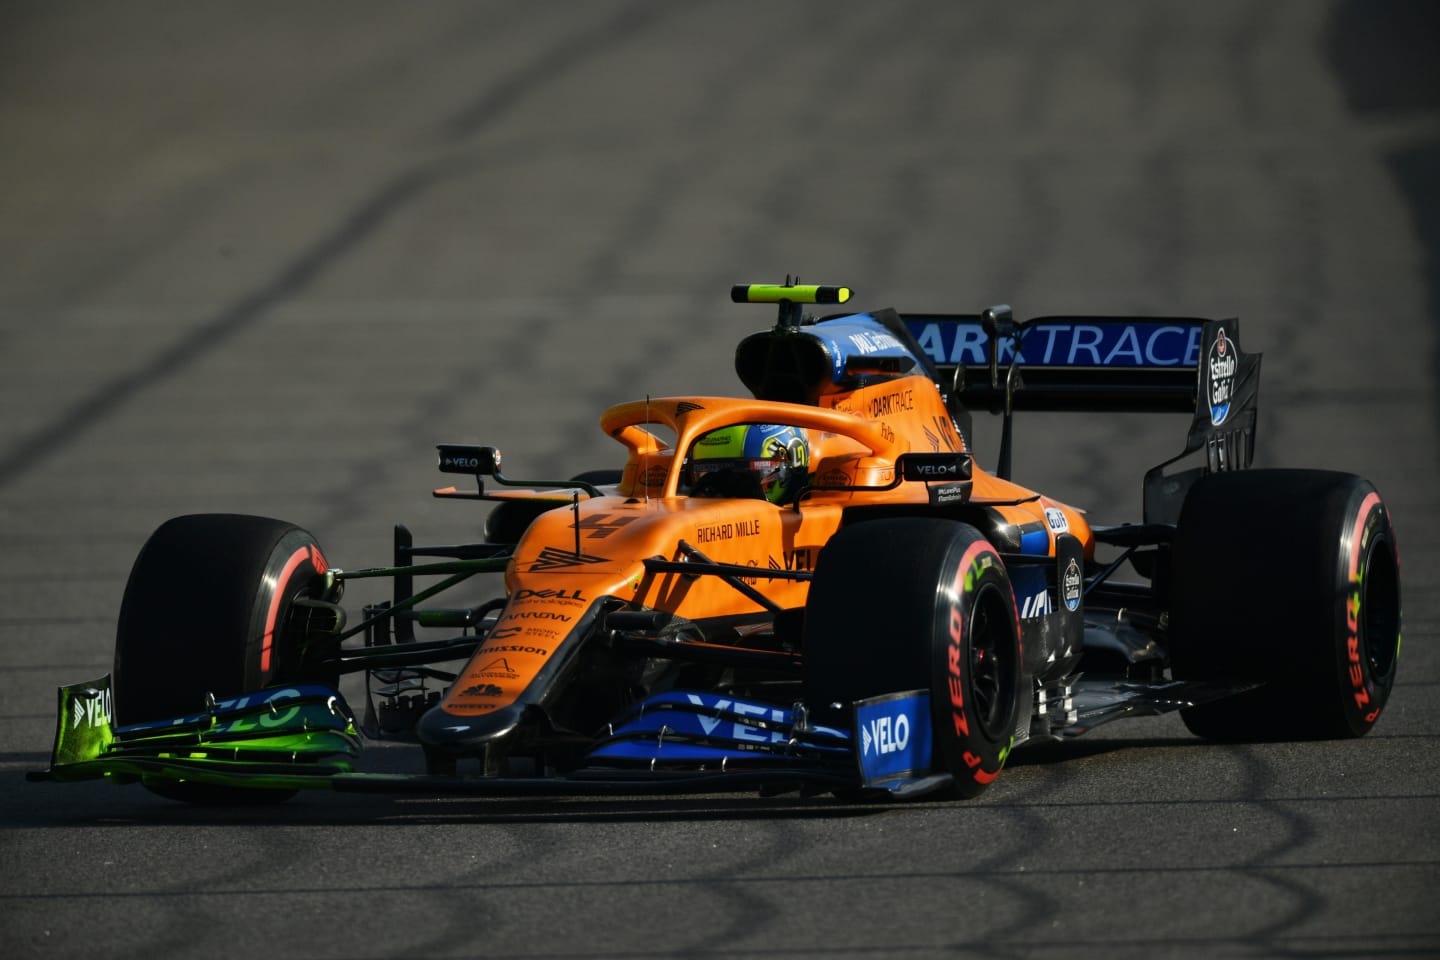 SOCHI, RUSSIA - SEPTEMBER 25: Lando Norris of Great Britain driving the (4) McLaren F1 Team MCL35 Renault on track during practice ahead of the F1 Grand Prix of Russia at Sochi Autodrom on September 25, 2020 in Sochi, Russia. (Photo by Dan Mullan/Getty Images)